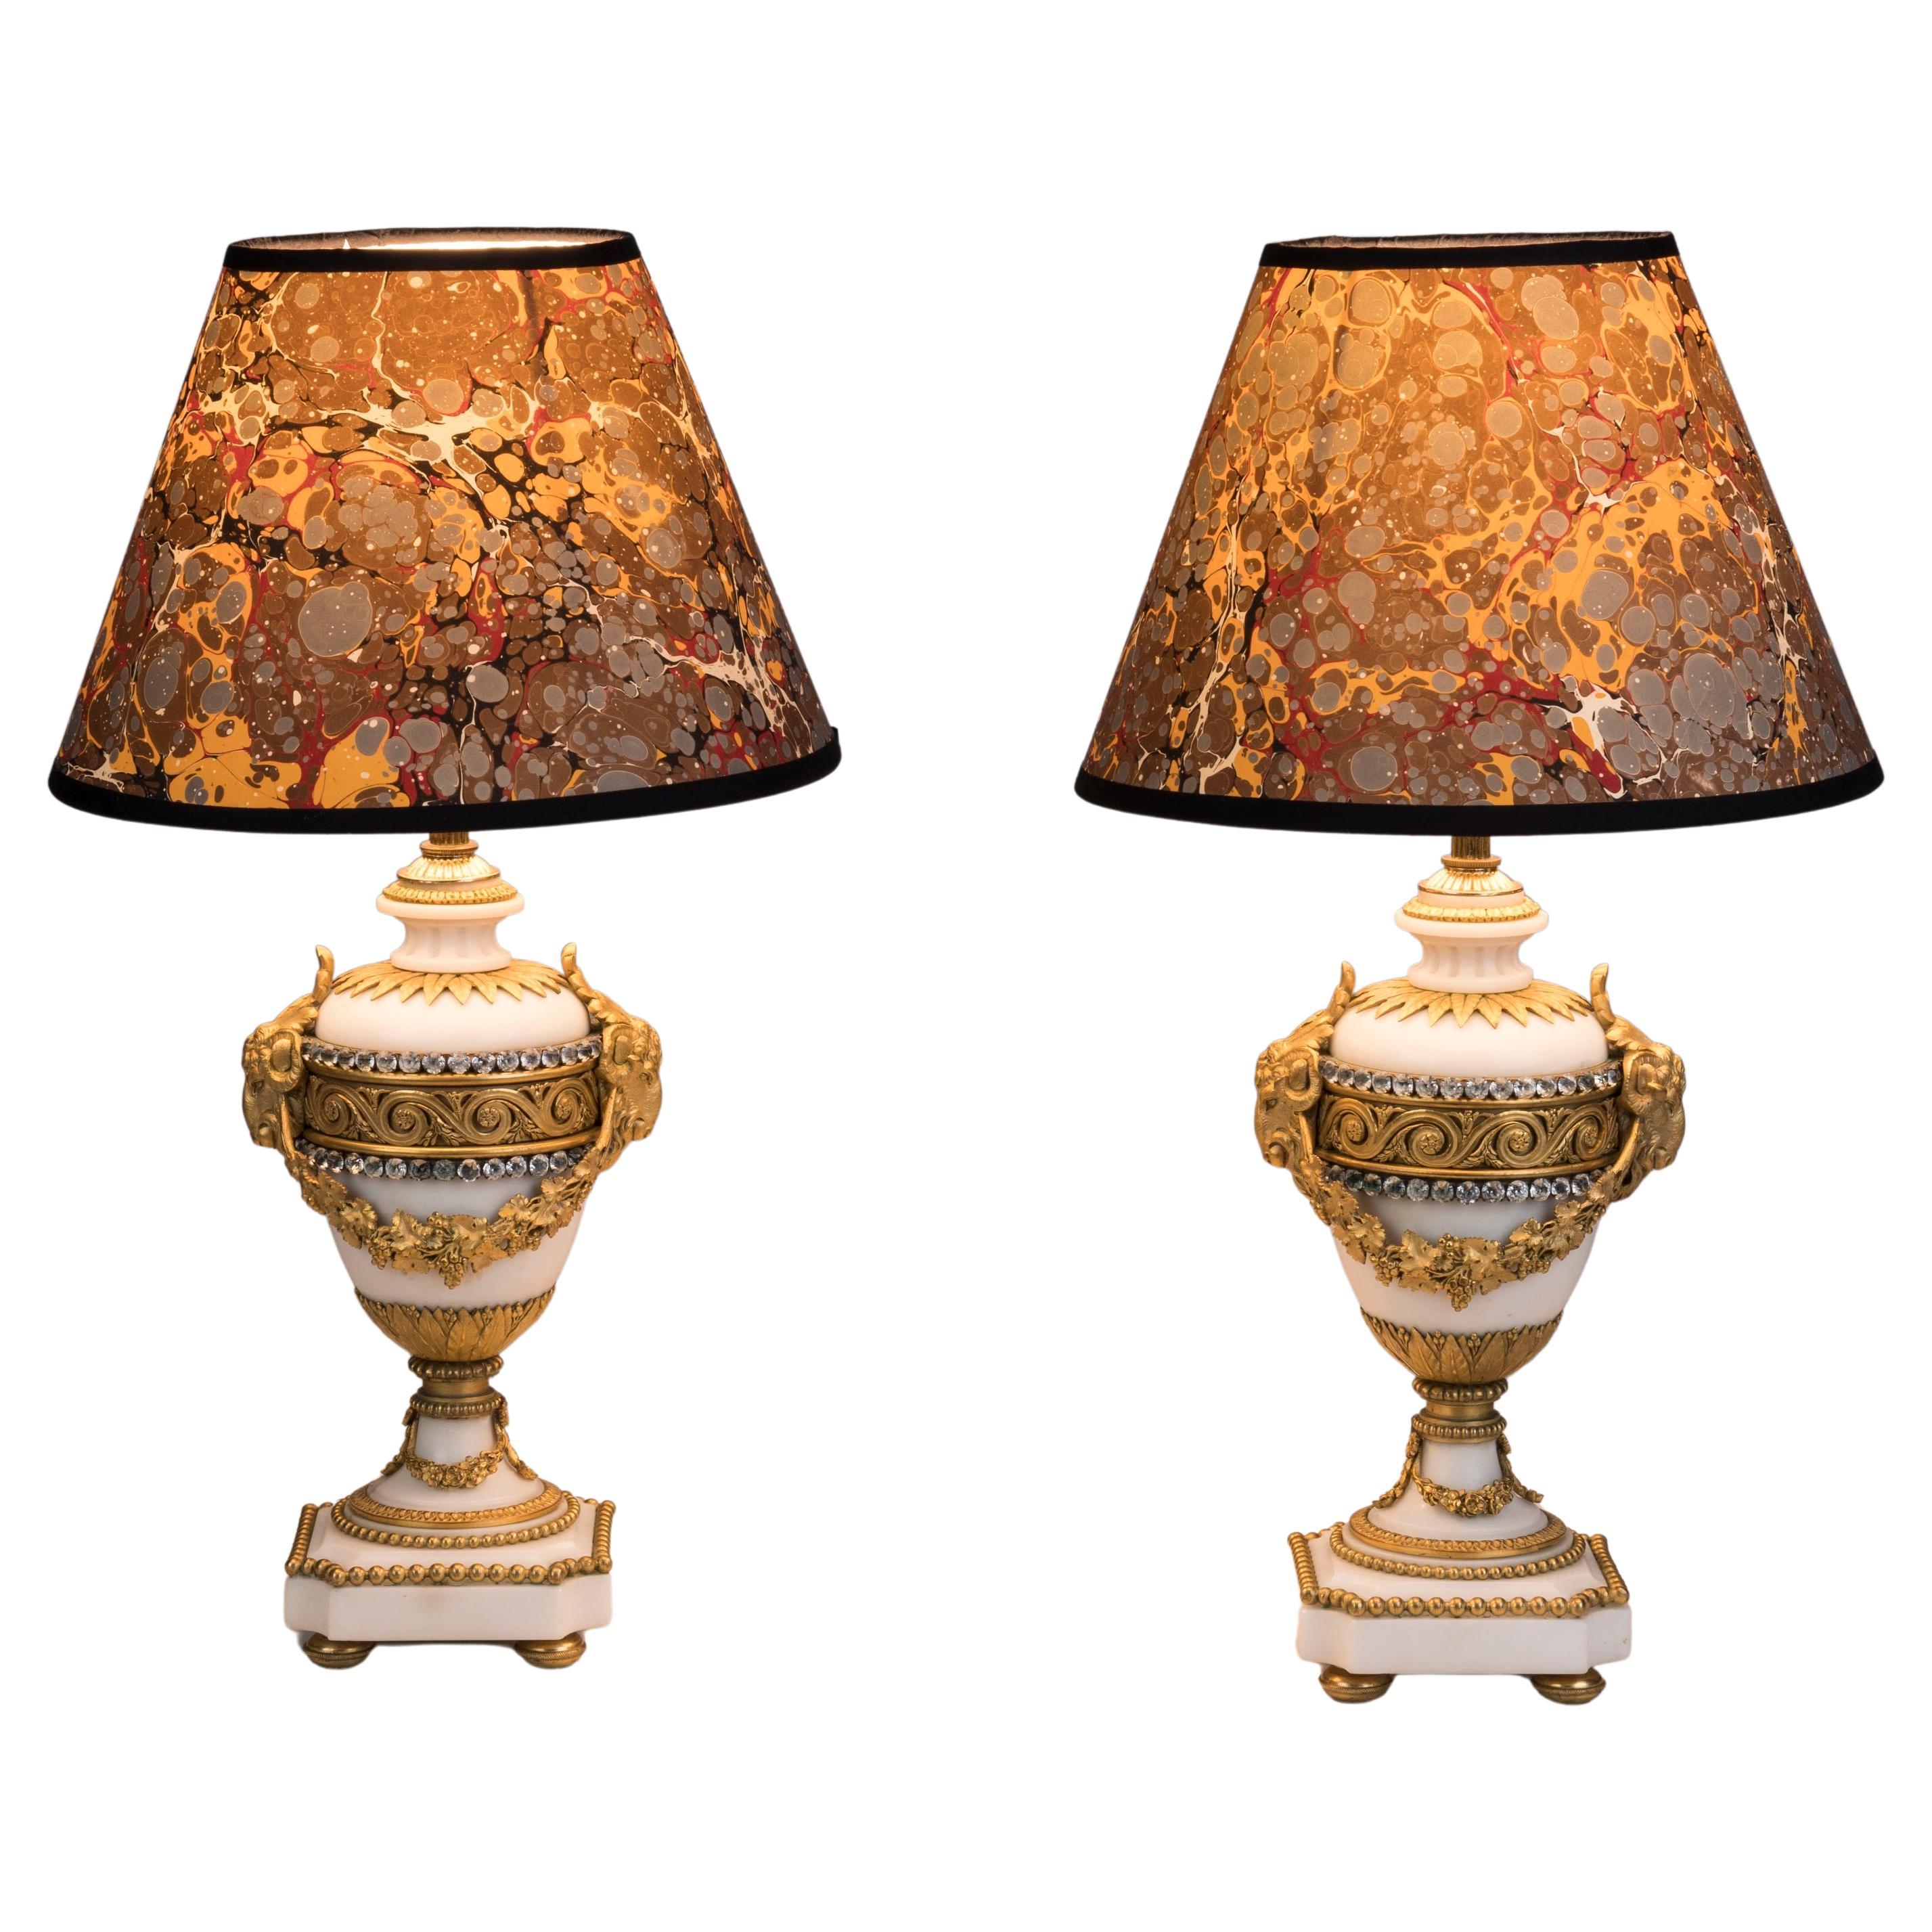 Pair of French Jewelled White Marble and Gilt Bronze Mounted Table Lamps